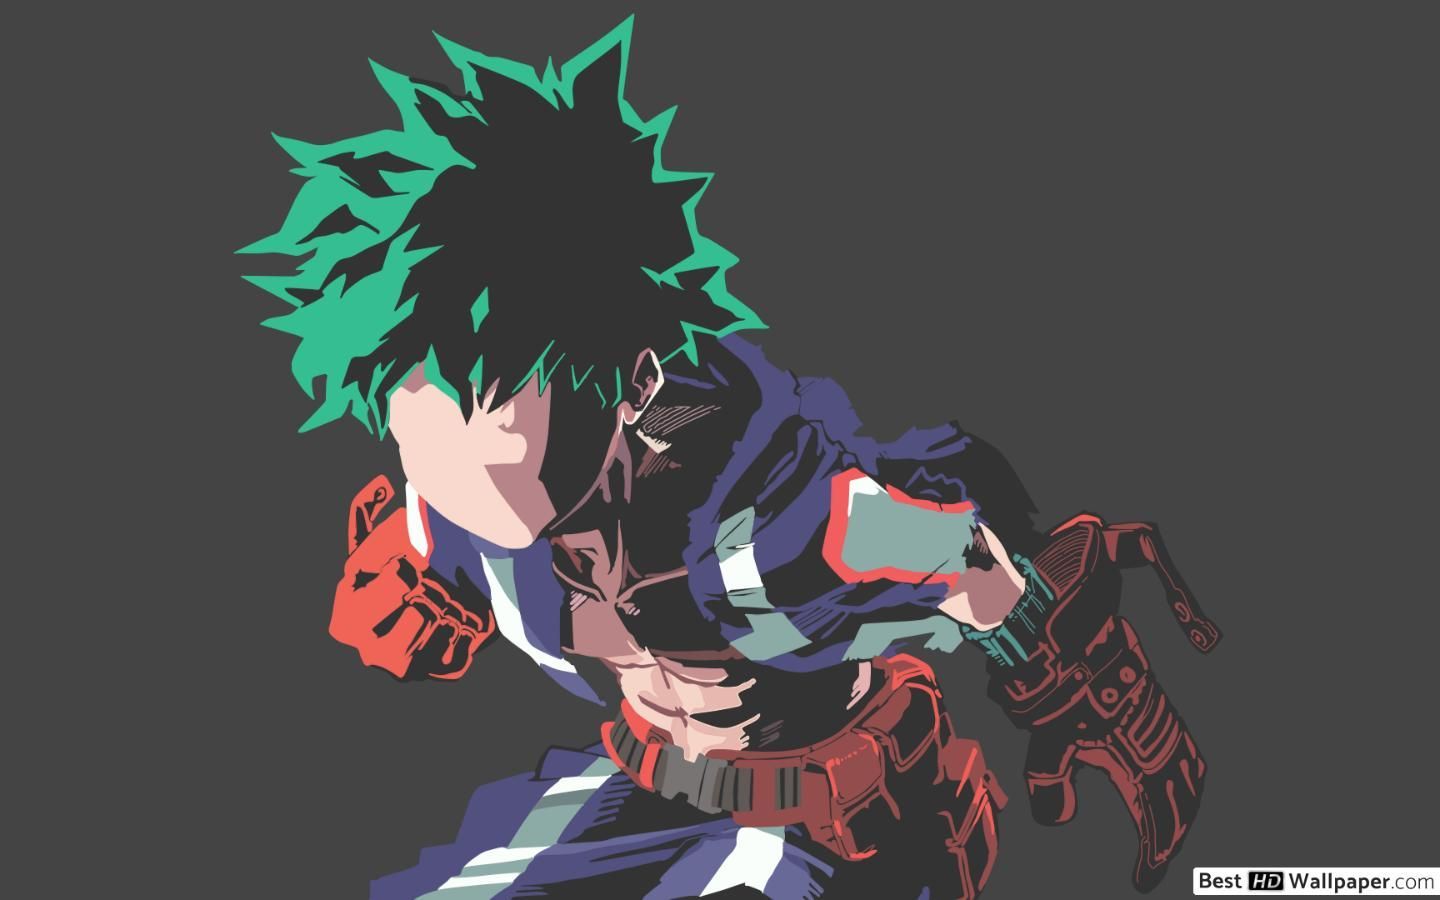 Awesome My Hero Academia Image For Your PC Desktop or Mac